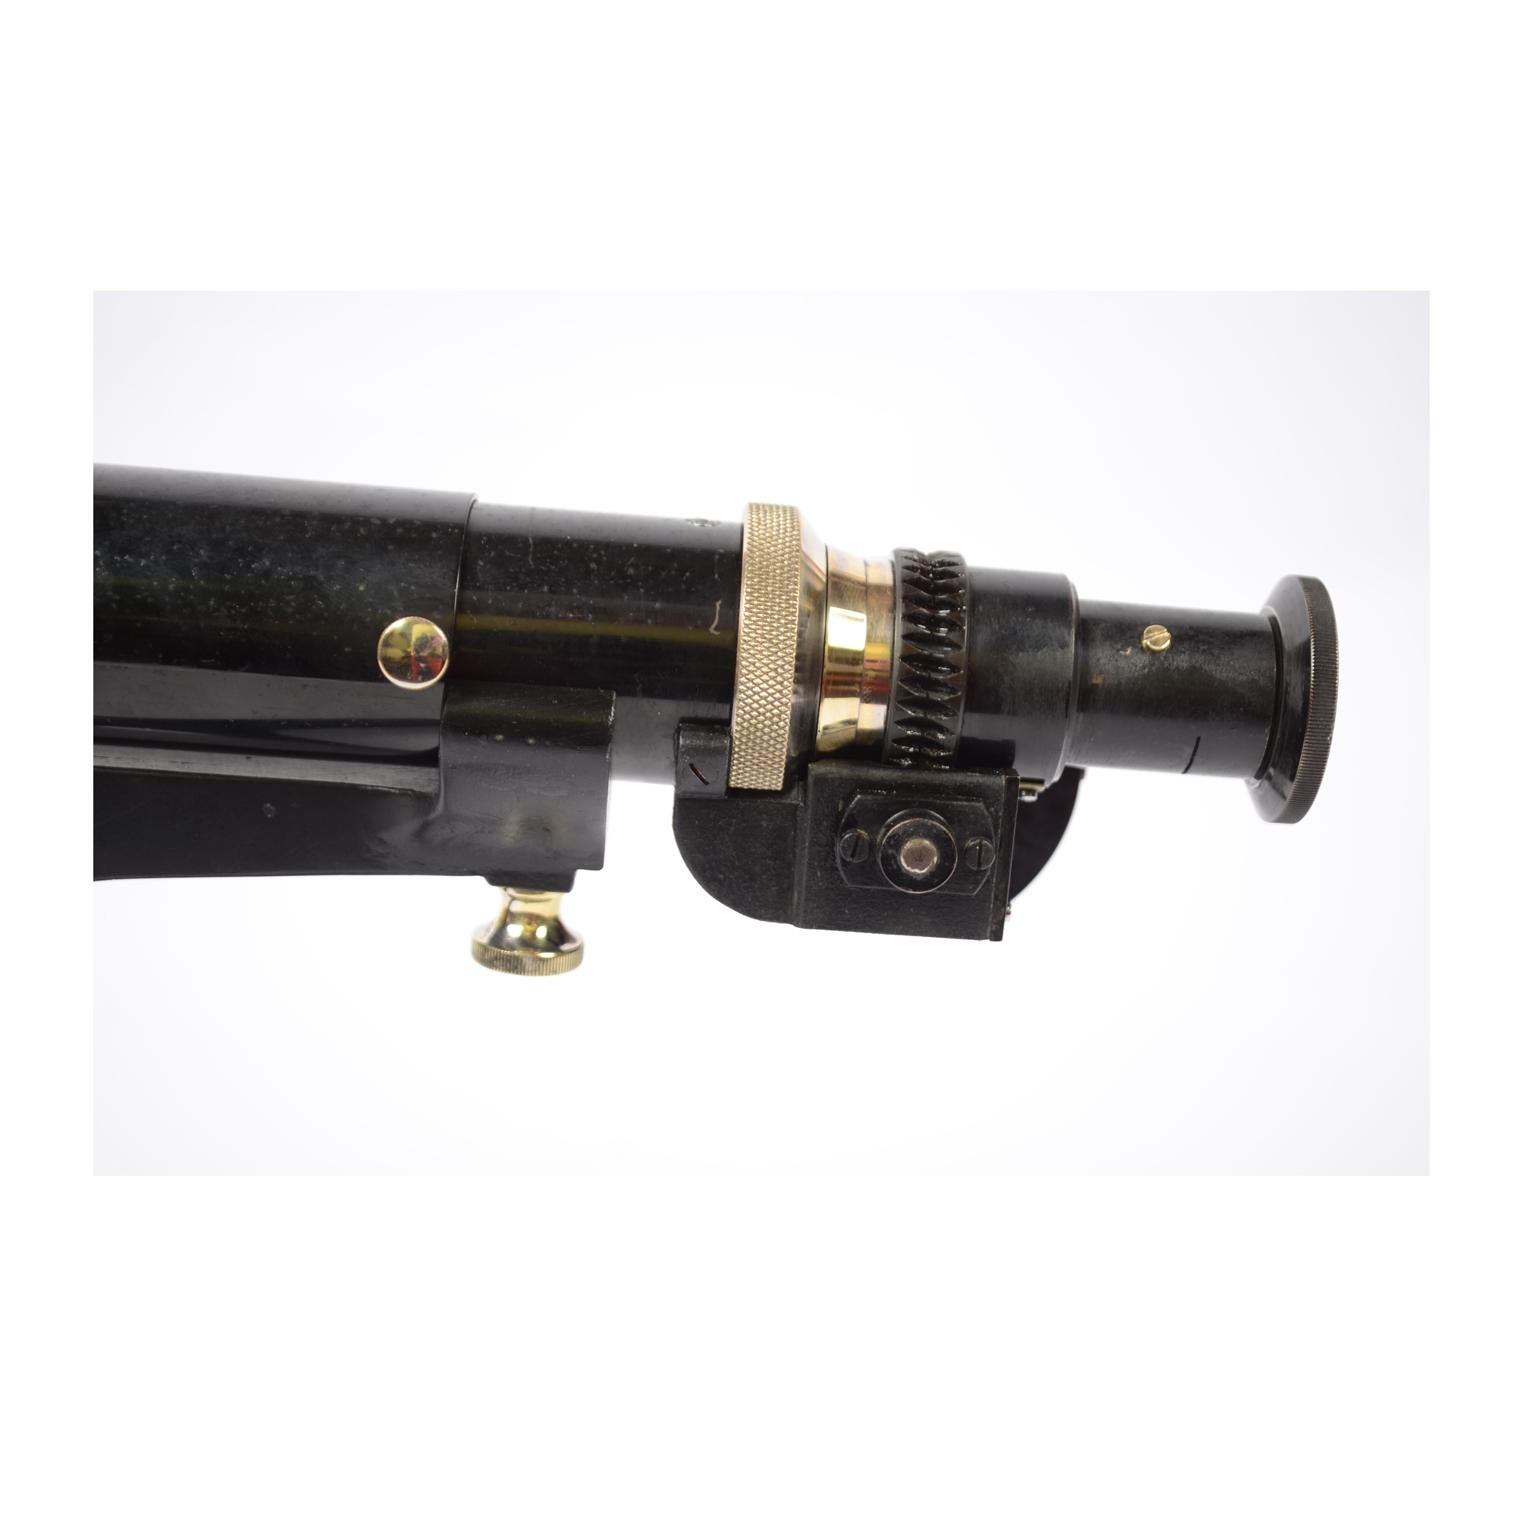 Refractor Polarimeter Physic Measuring Instrument Made by Steindorff & Co 1920s For Sale 5